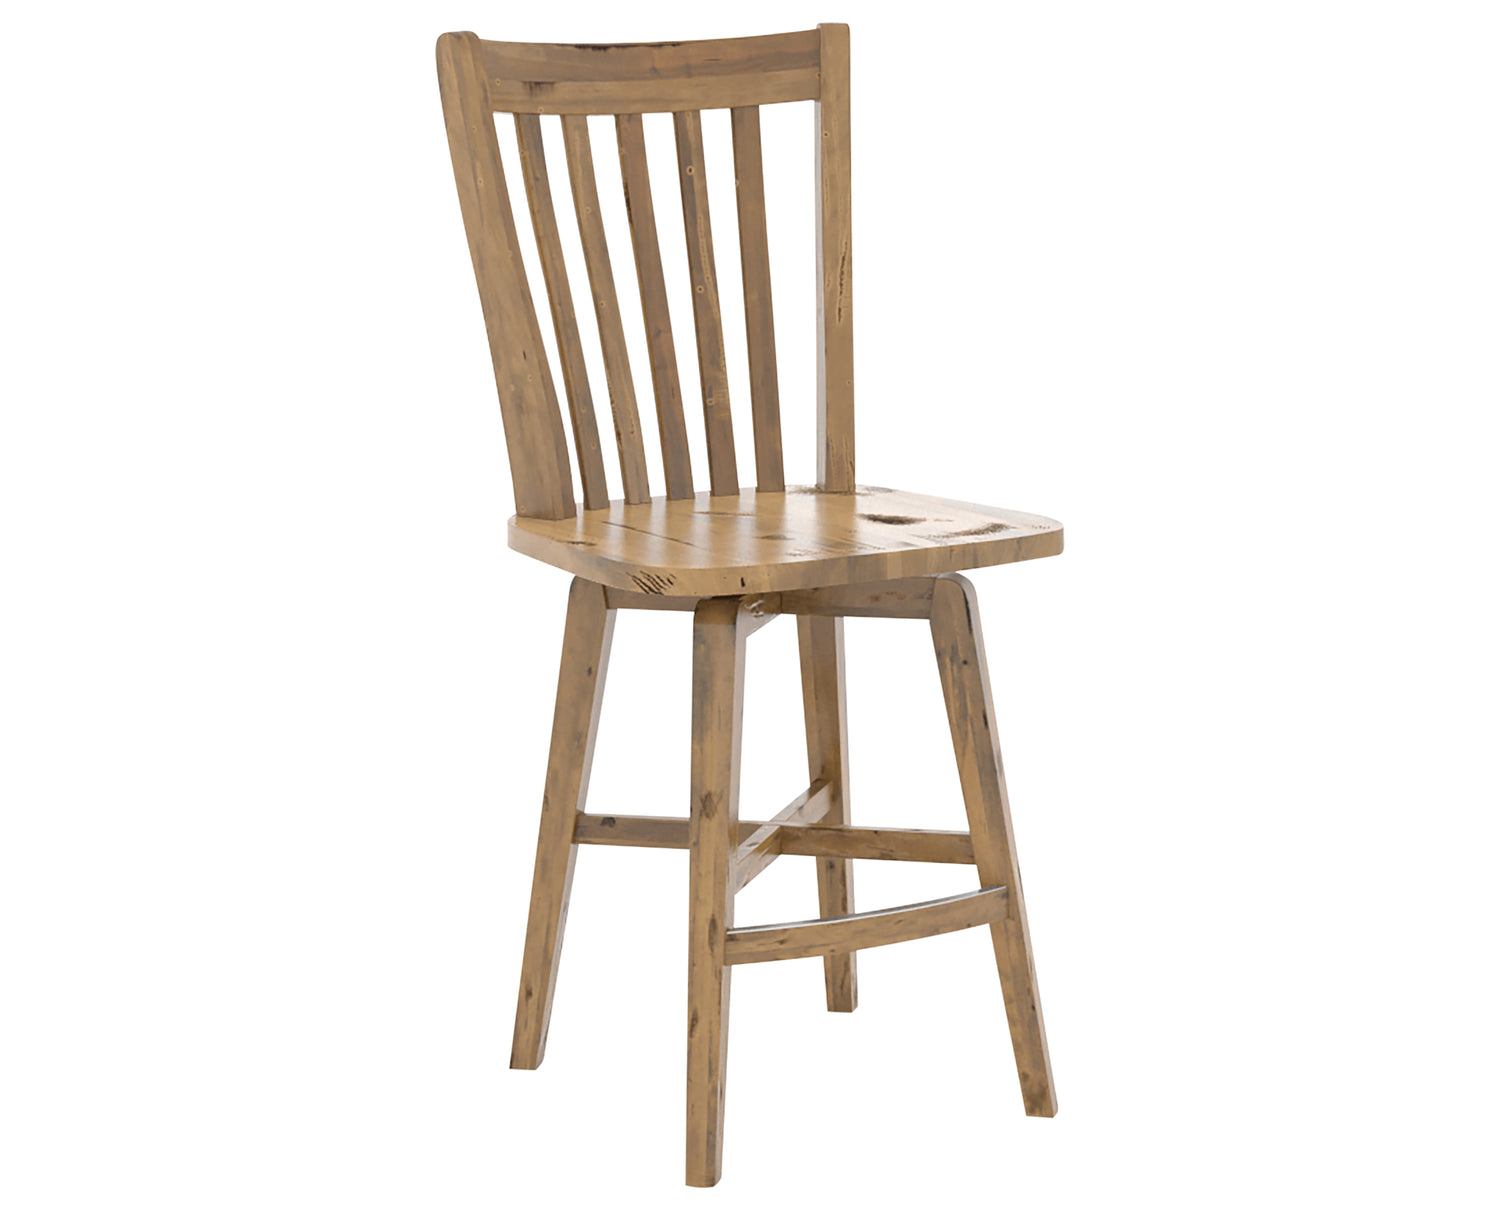 Oak Washed | Canadel Champlain Counter Stool 7119 | Valley Ridge Furniture